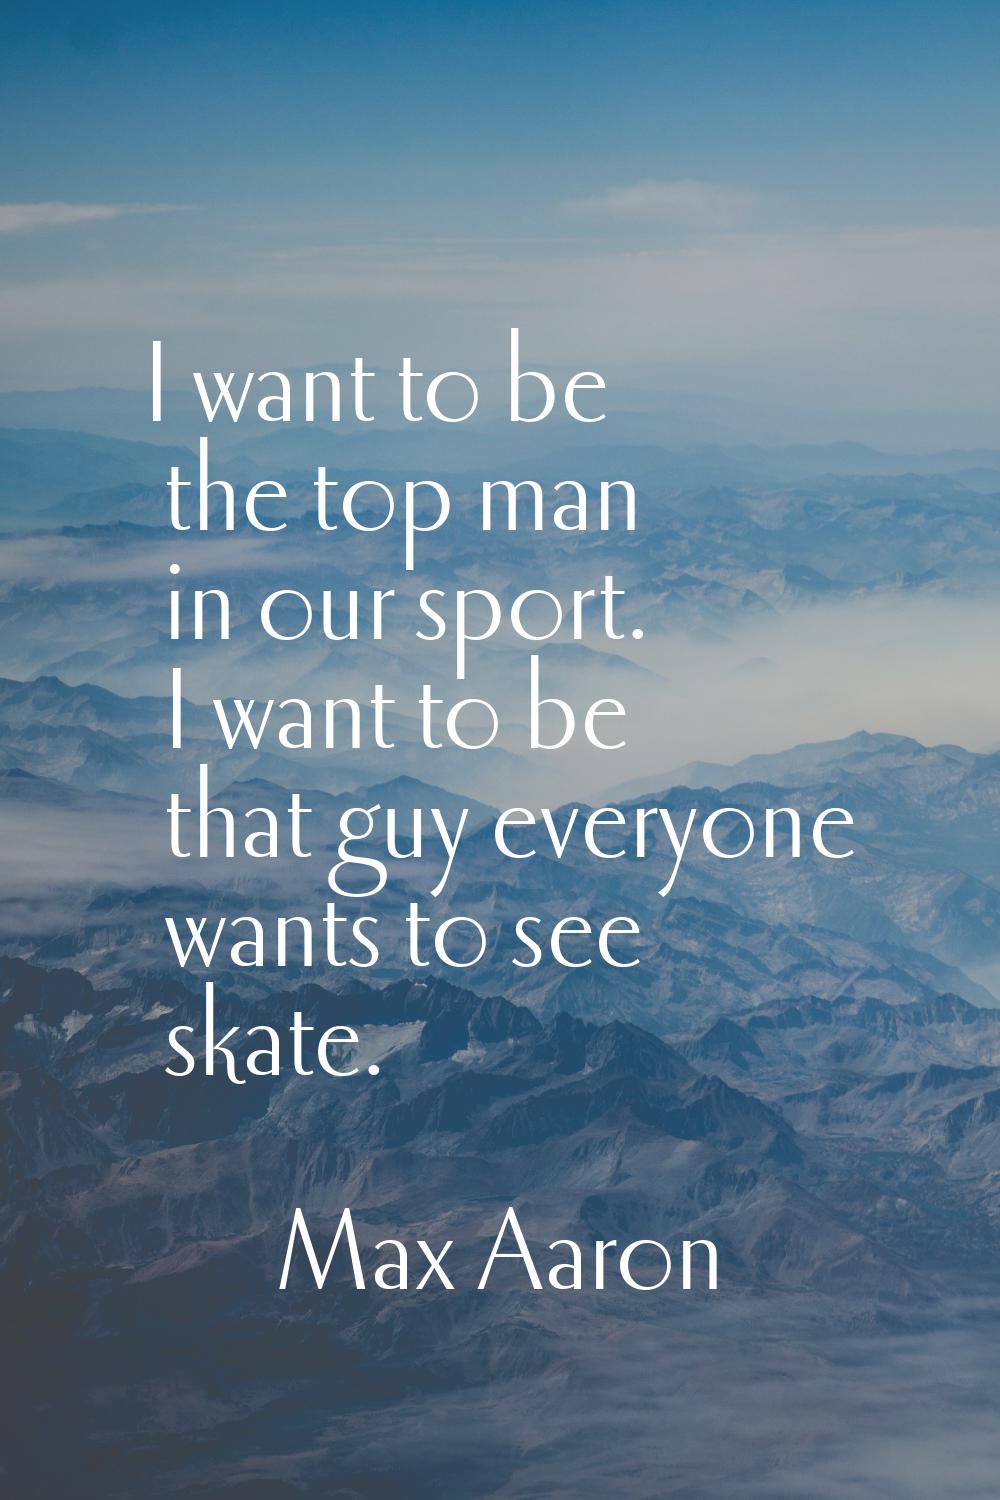 I want to be the top man in our sport. I want to be that guy everyone wants to see skate.